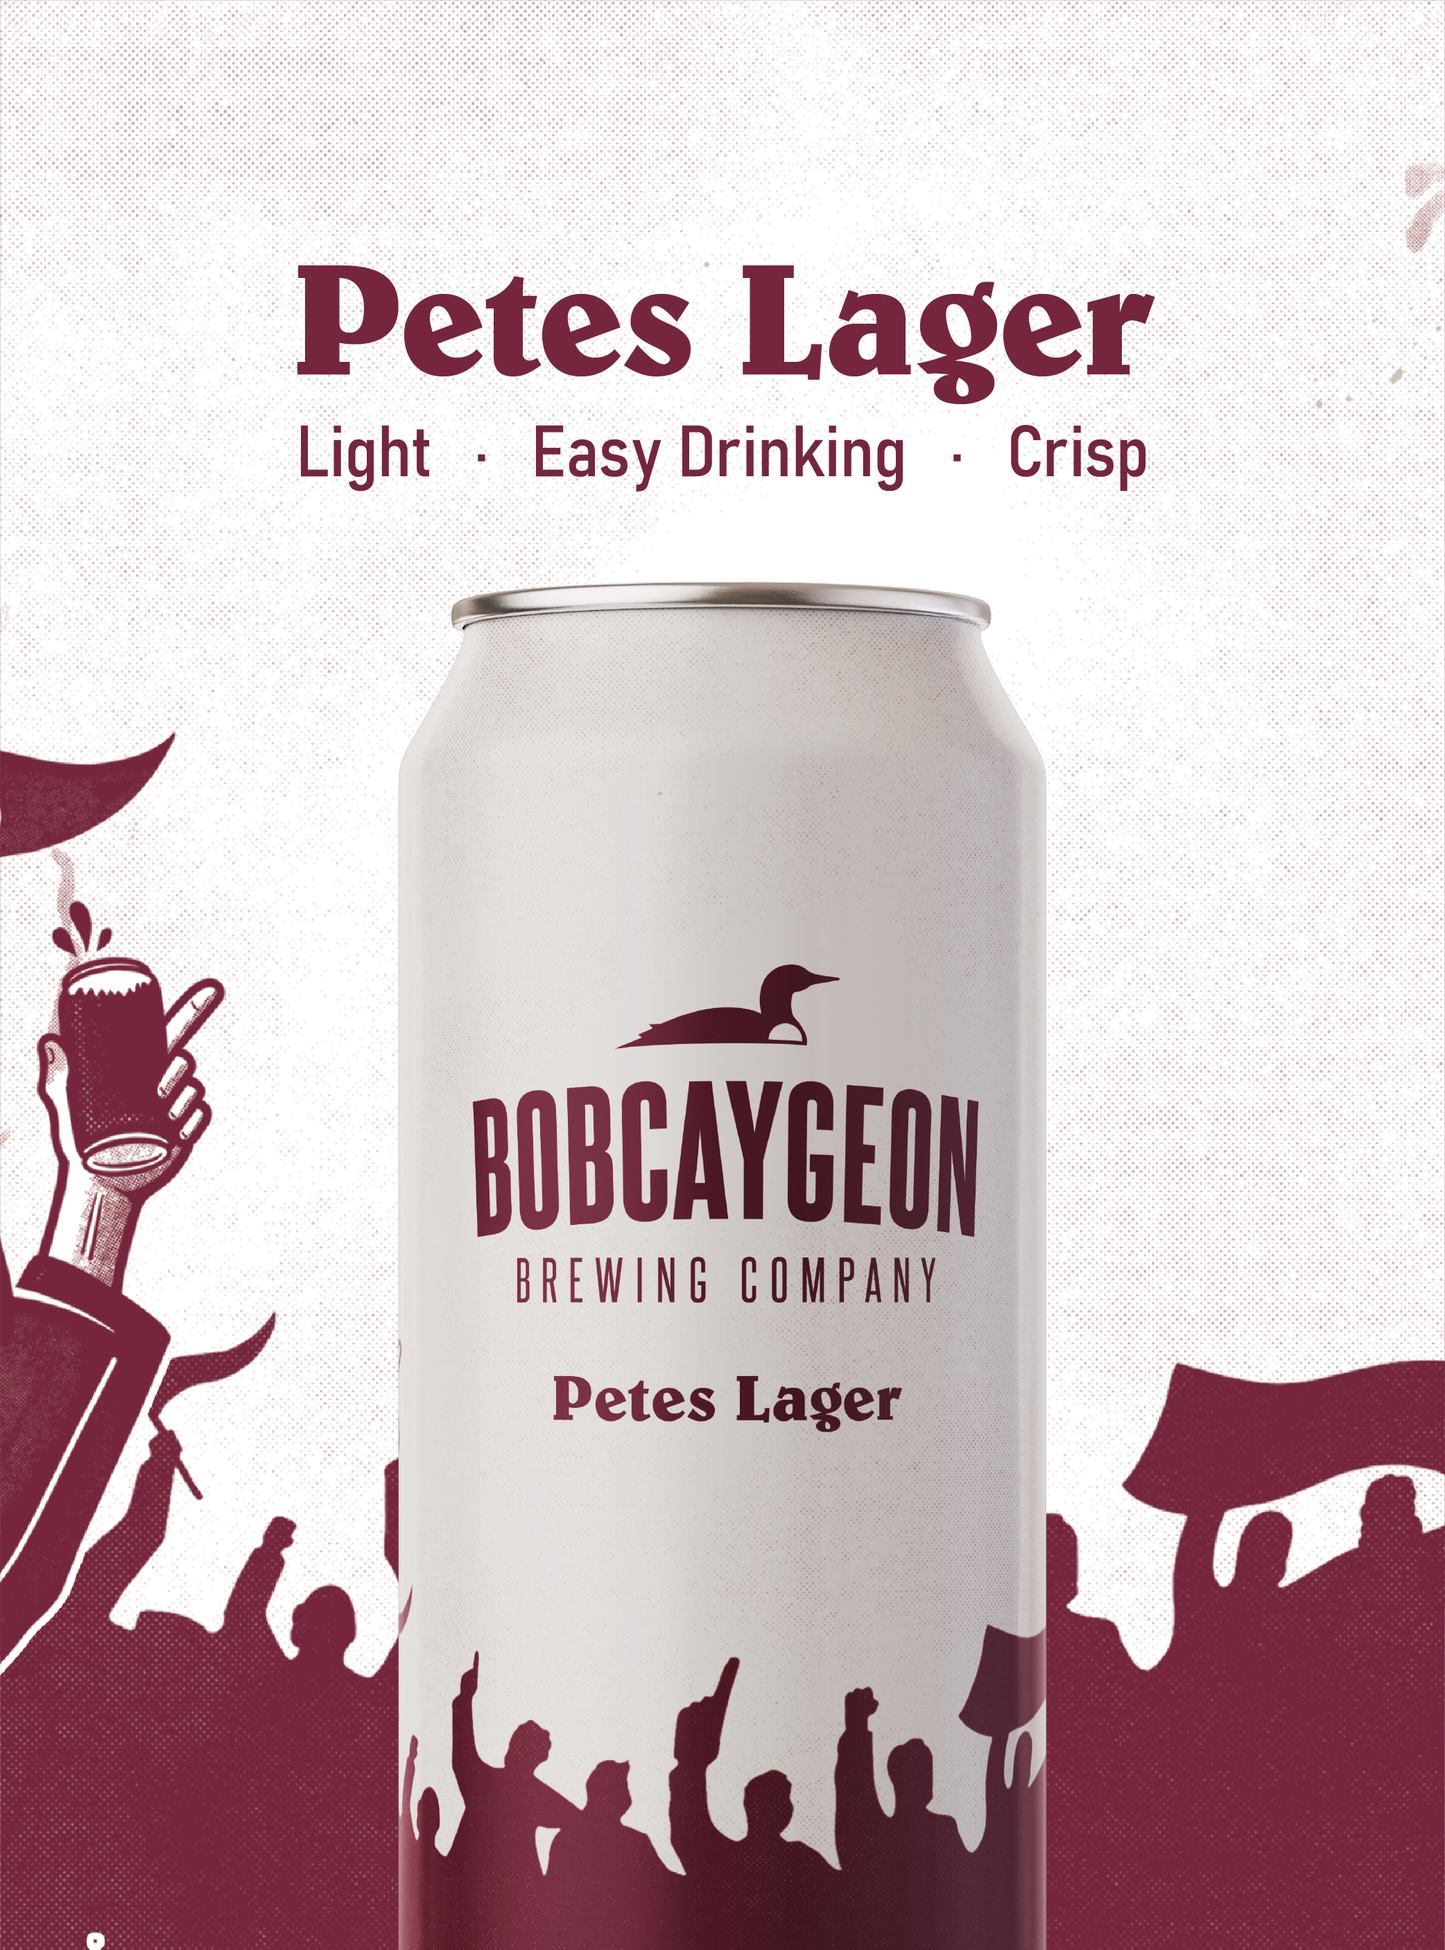 Petes Lager